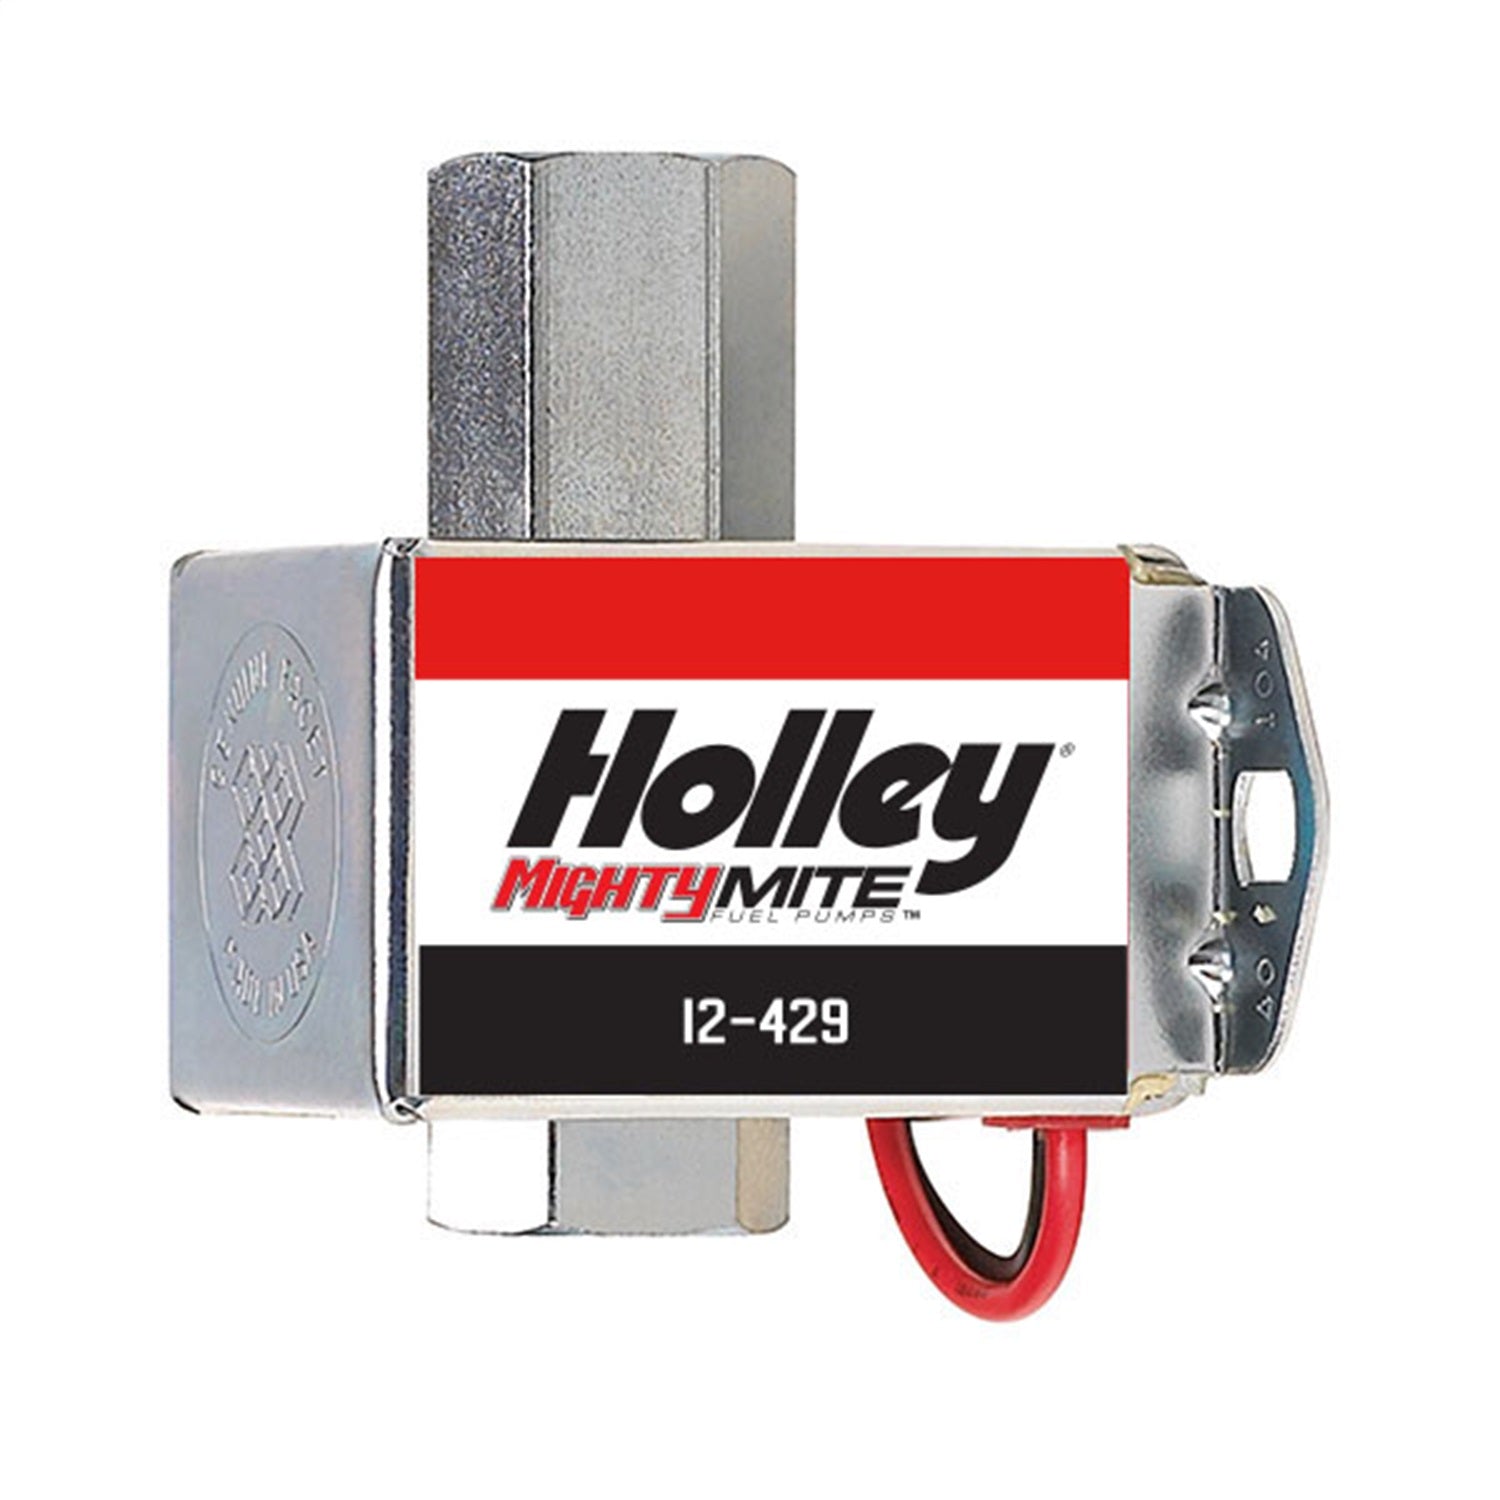 Holley Performance 12-429 Mighty Might Electric Fuel Pump